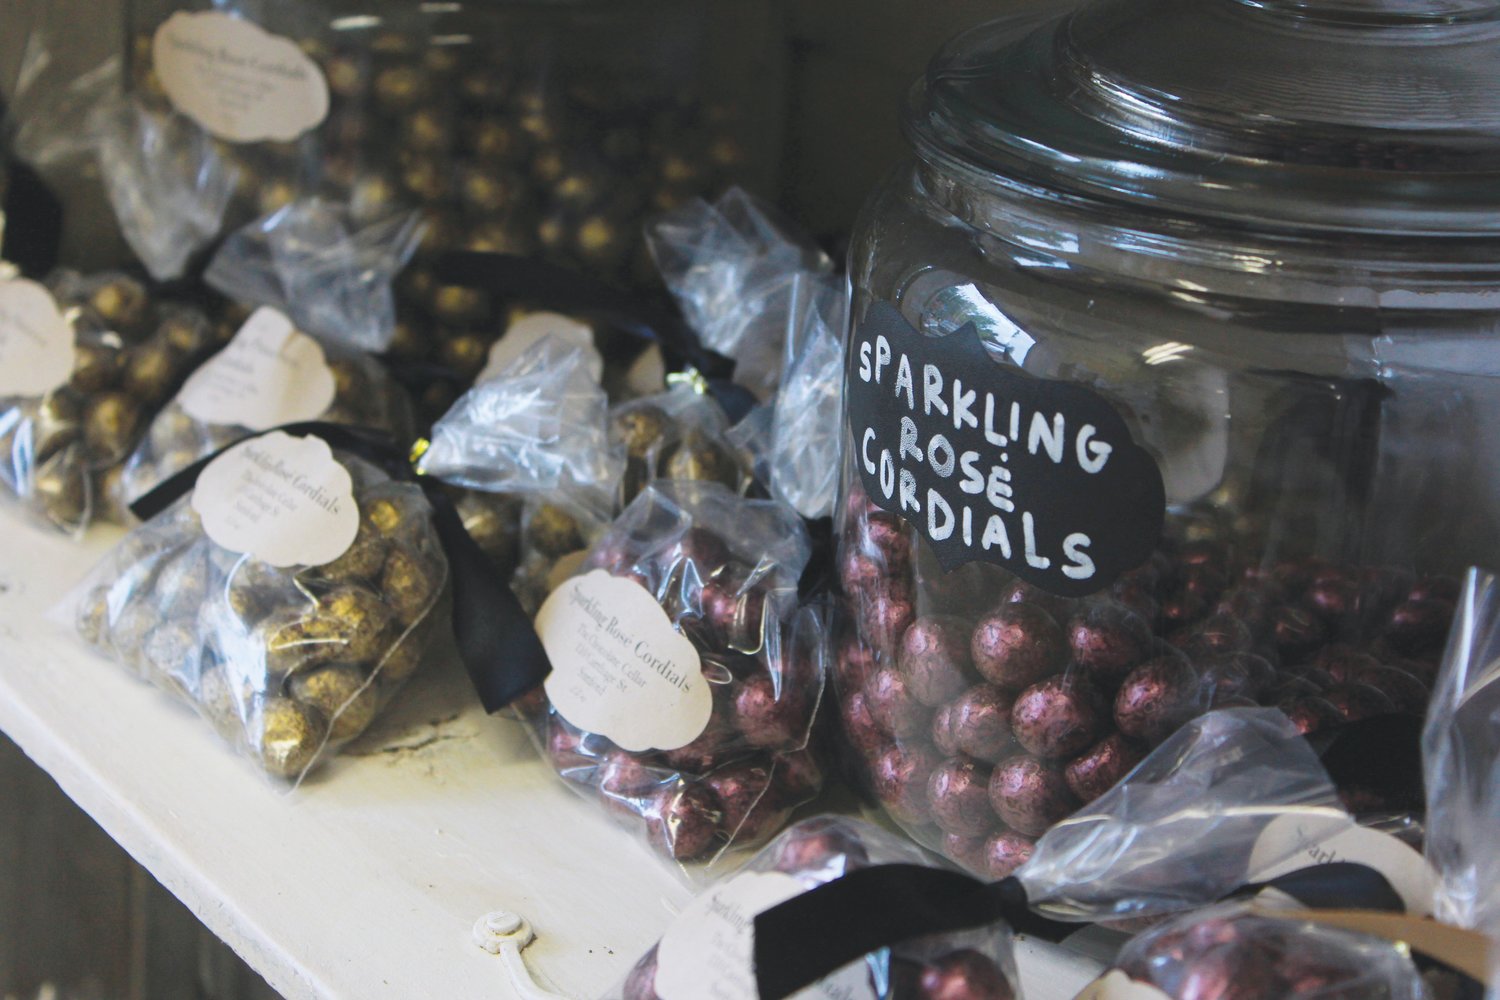 Sparkling rose cordials fill up glass jars and bags on a shelf inside the Chocolate Cellar Deux in Pittsboro.